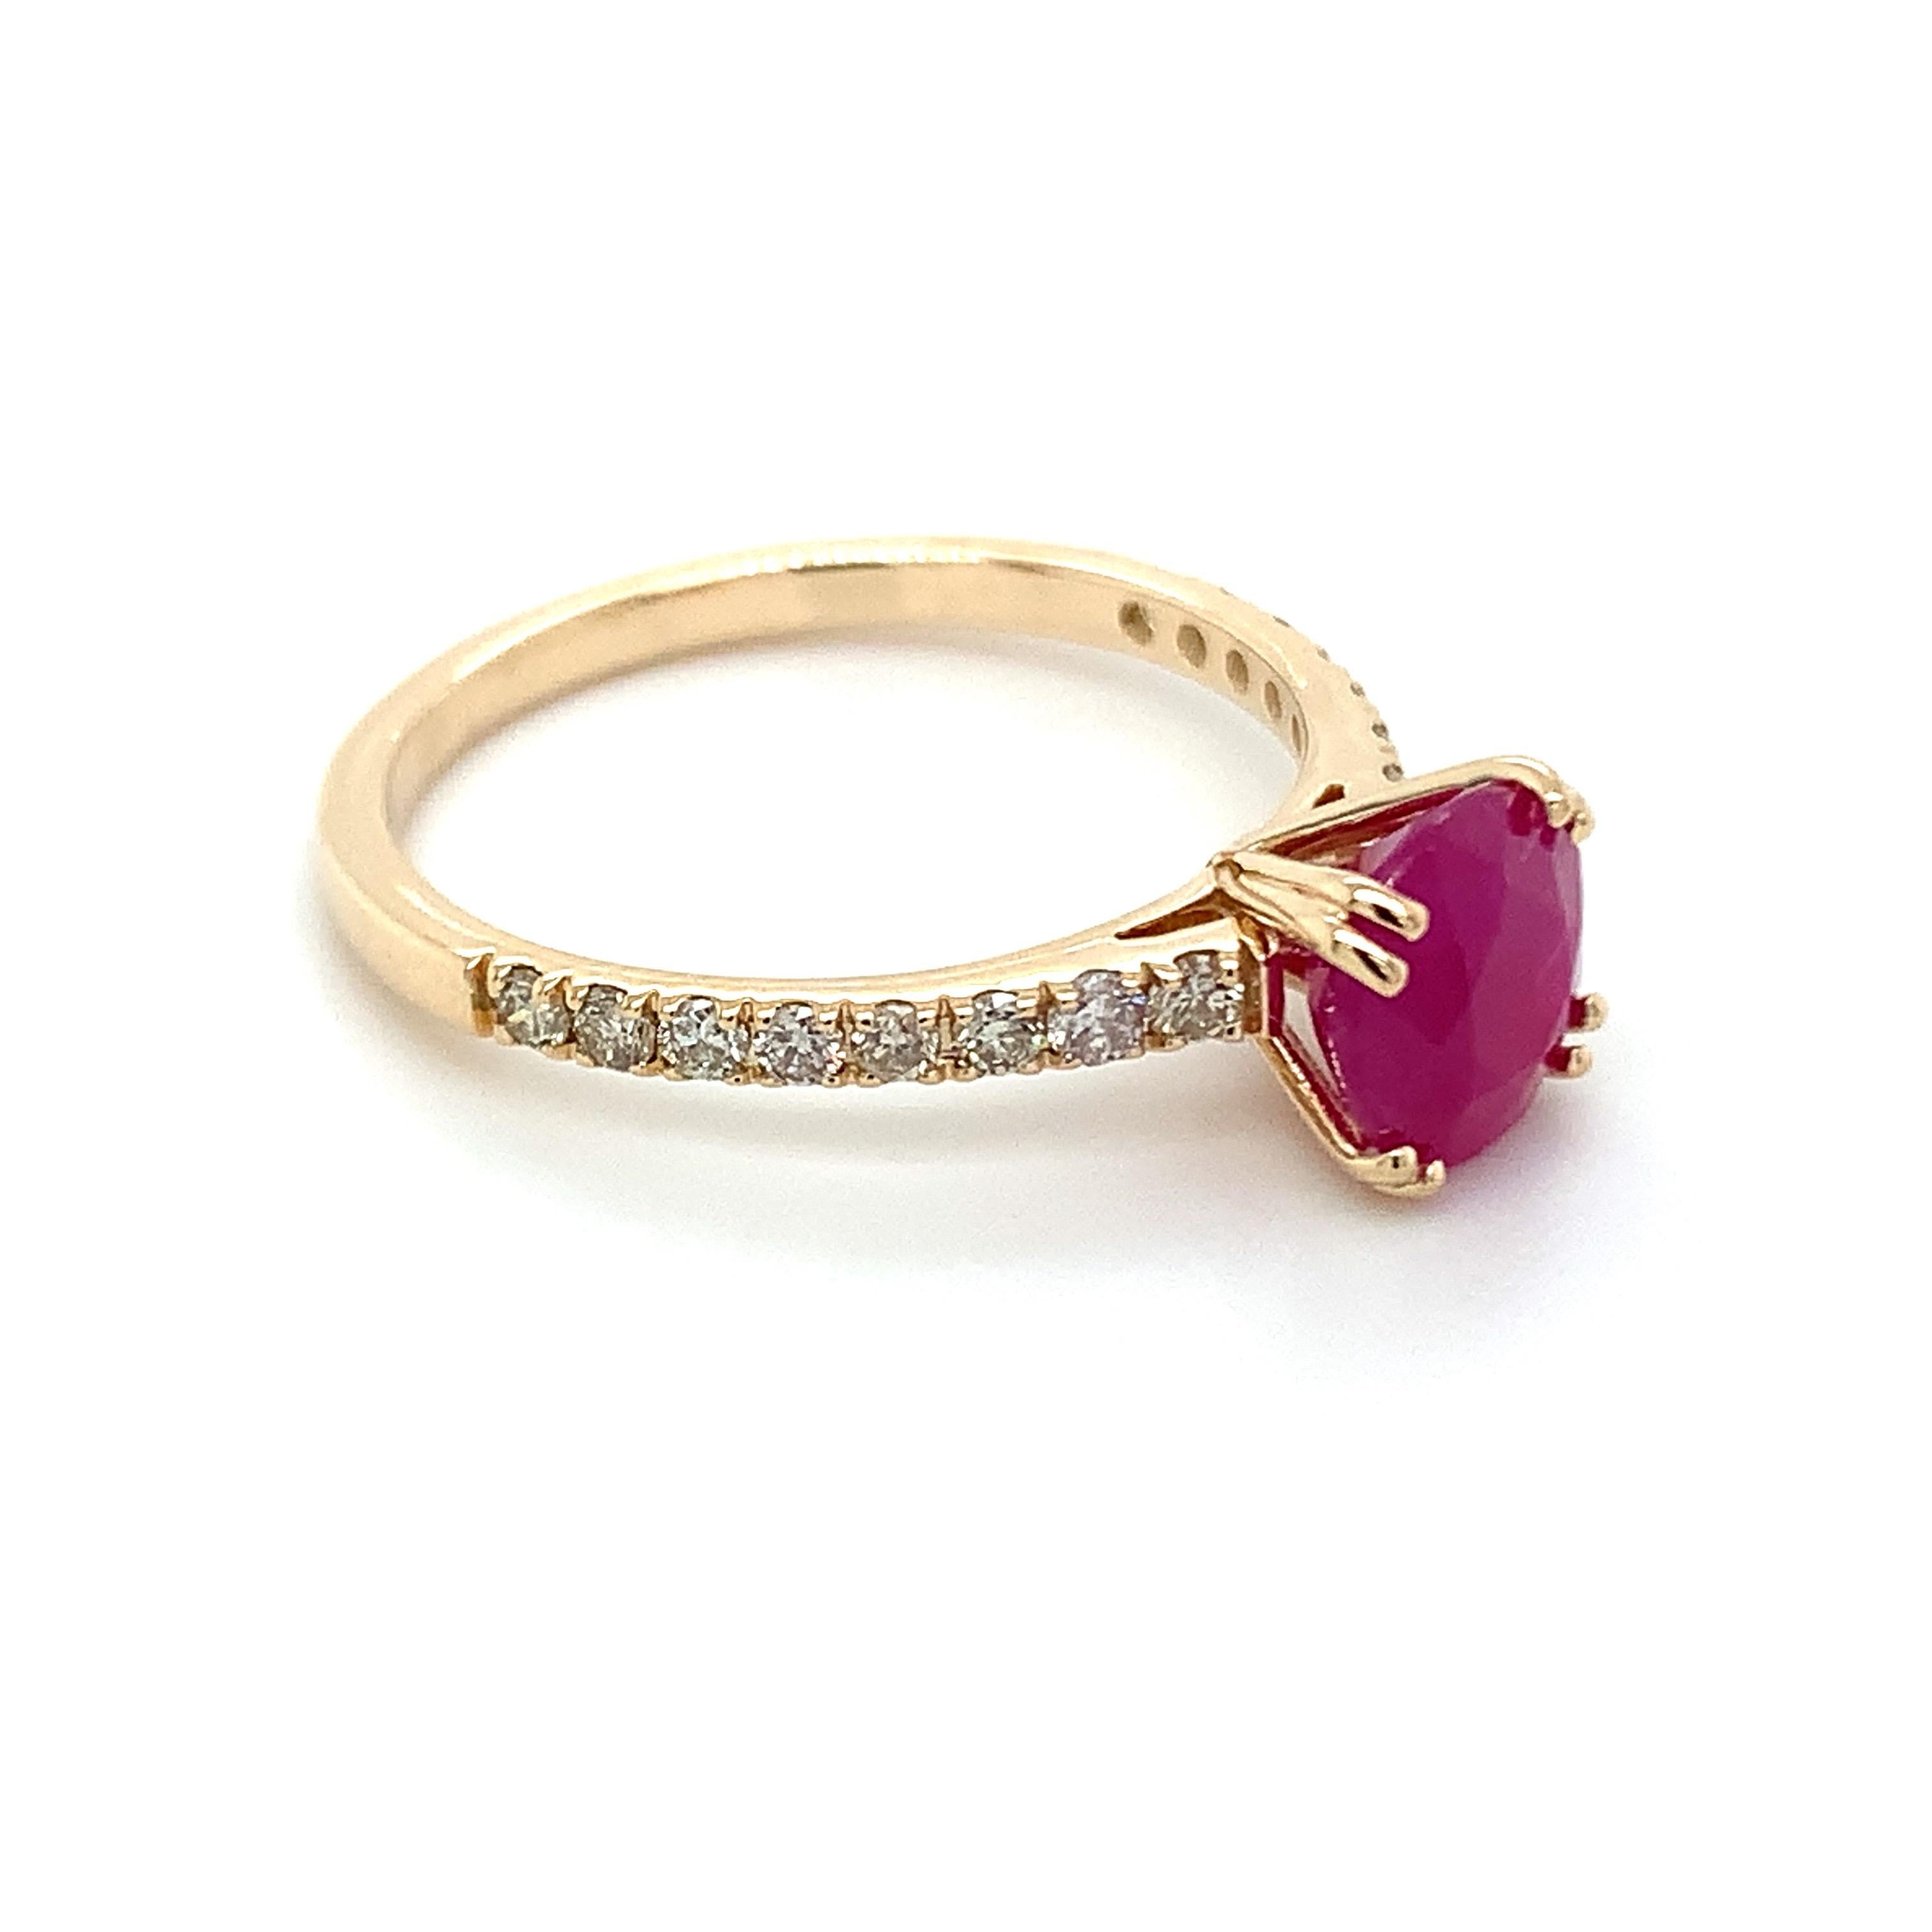 Round shape Ruby gemstone beautifully crafted in a 10K yellow gold ring with natural diamonds.

An exquisite red color birthstone for July. Believed to convey a status of power & wealth. Explore a vast range of precious stone Jewelry in our store.